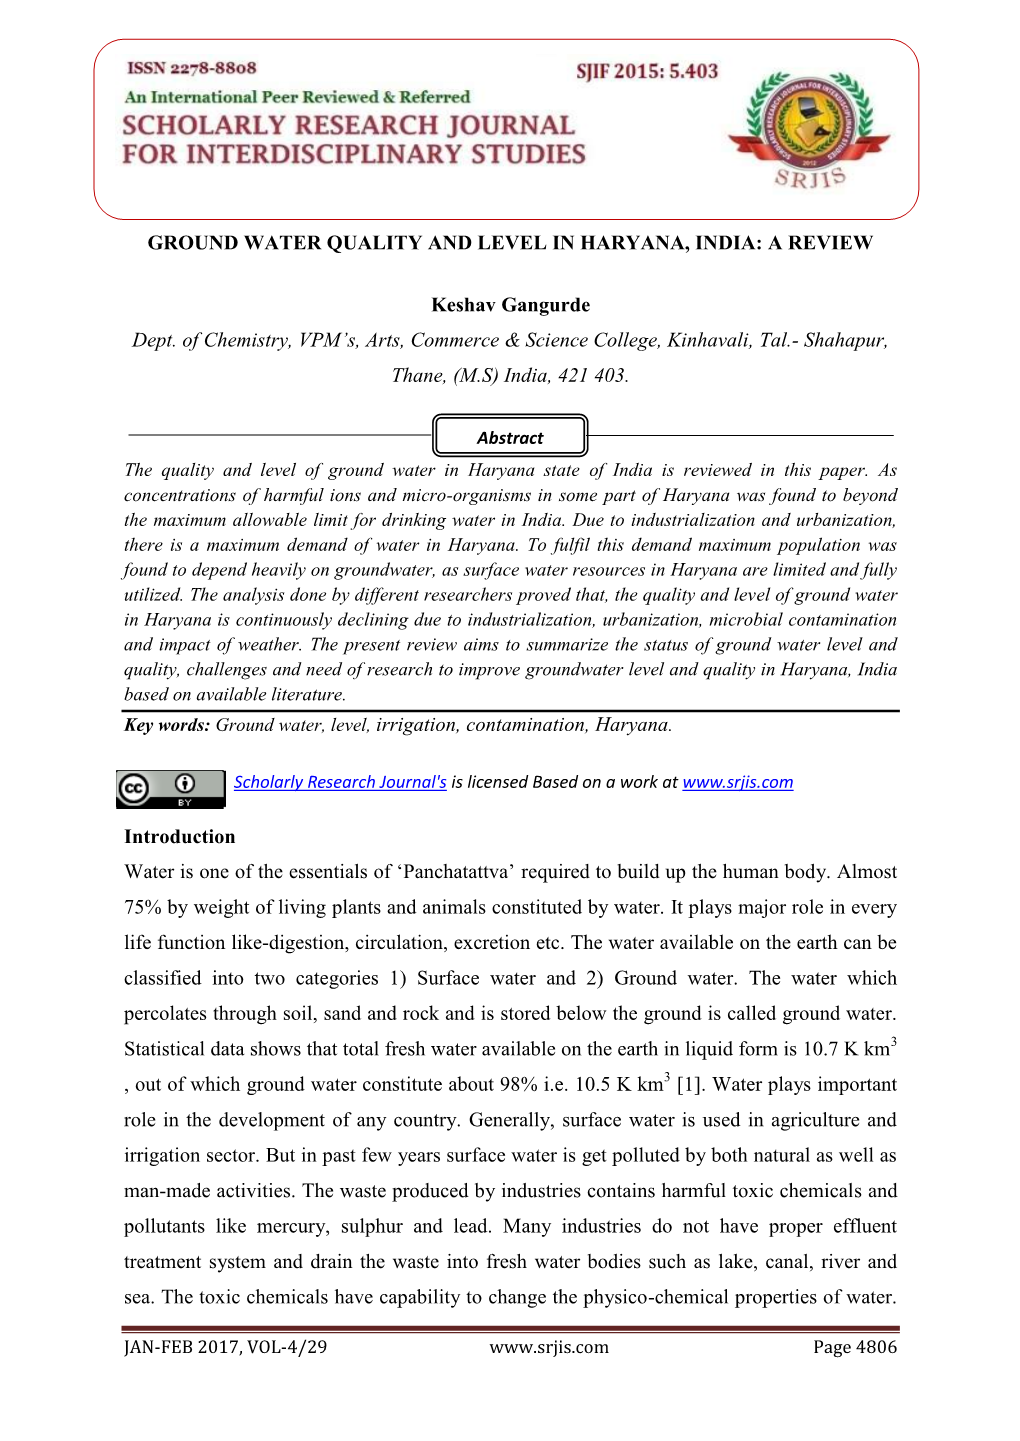 Ground Water Quality and Level in Haryana, India: a Review